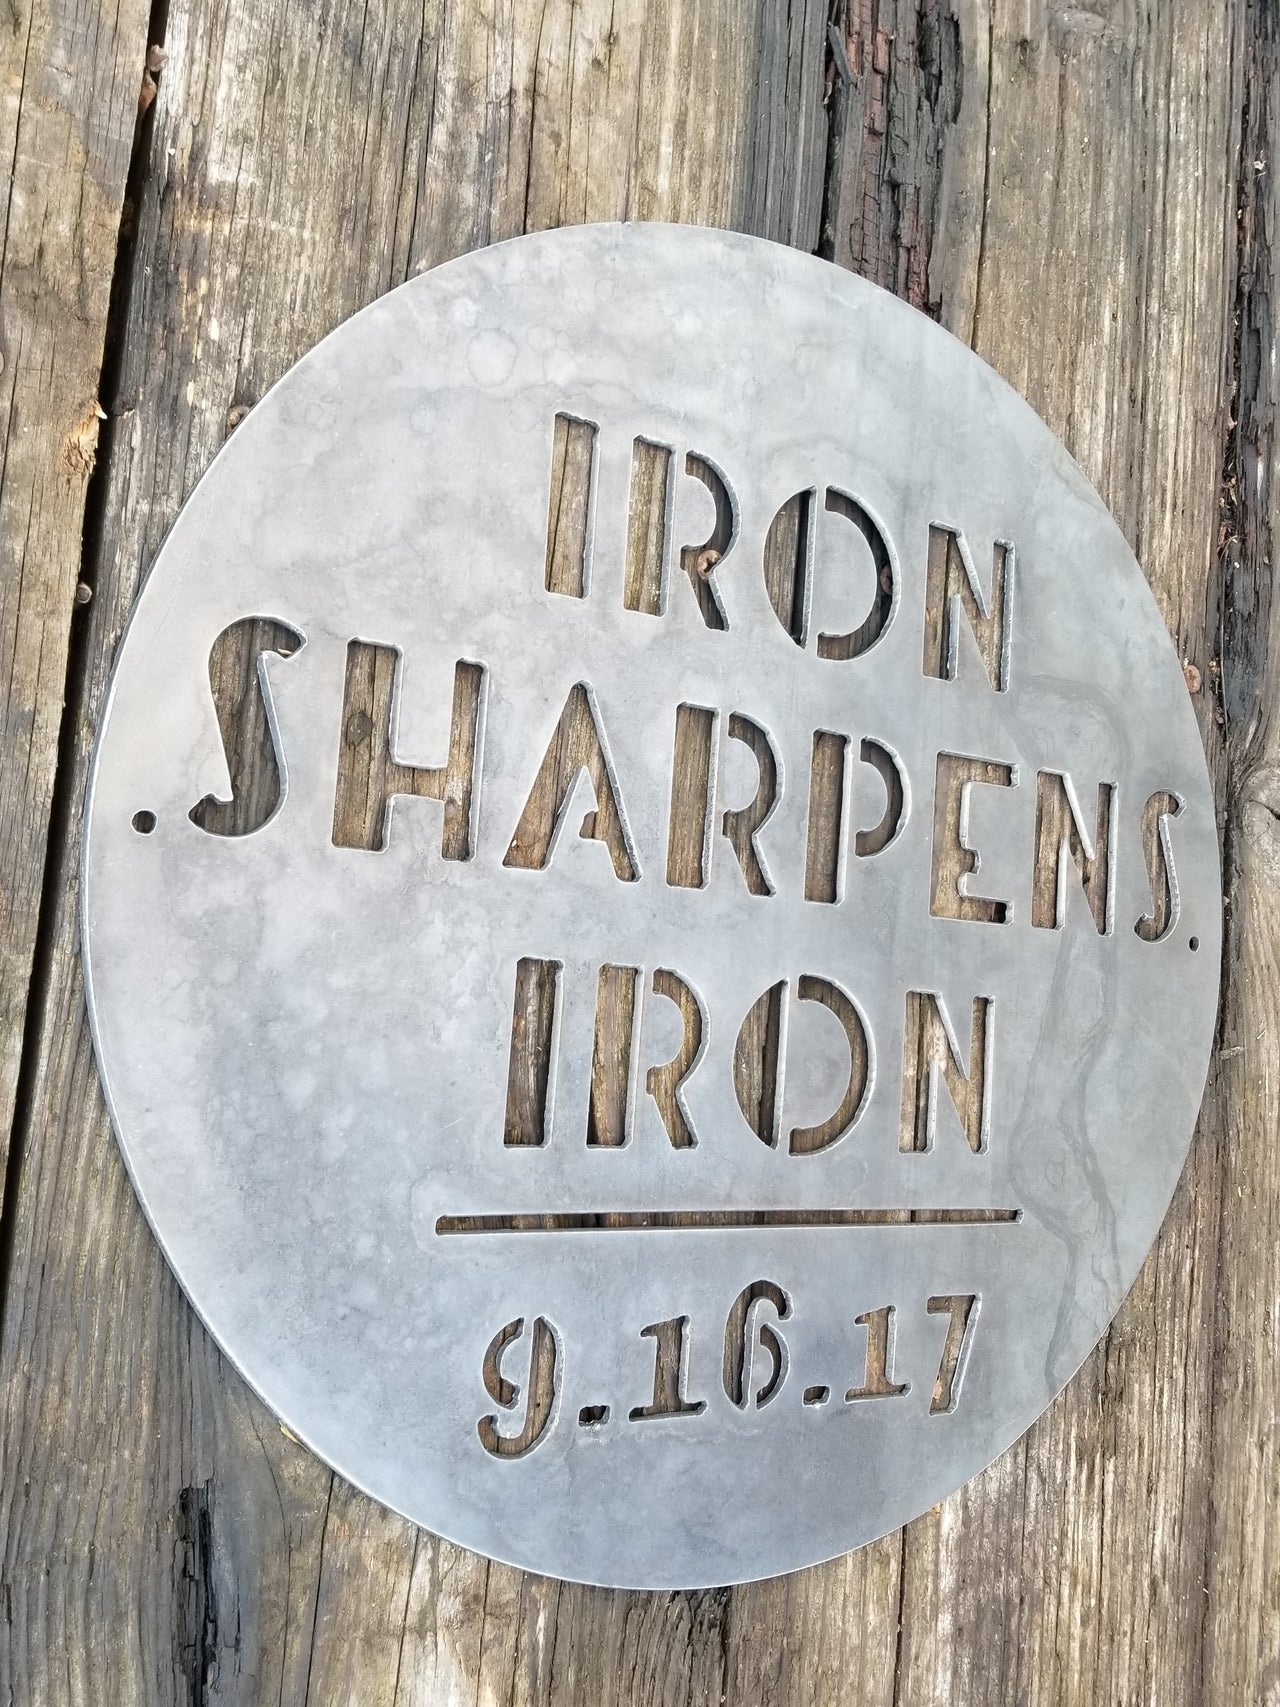 Iron Sharpens Iron - Personalized Date - 27:17 Proverbs - Biblical Metal Quote Sign - Modern - Minimalist - Industrial - Free Shipping